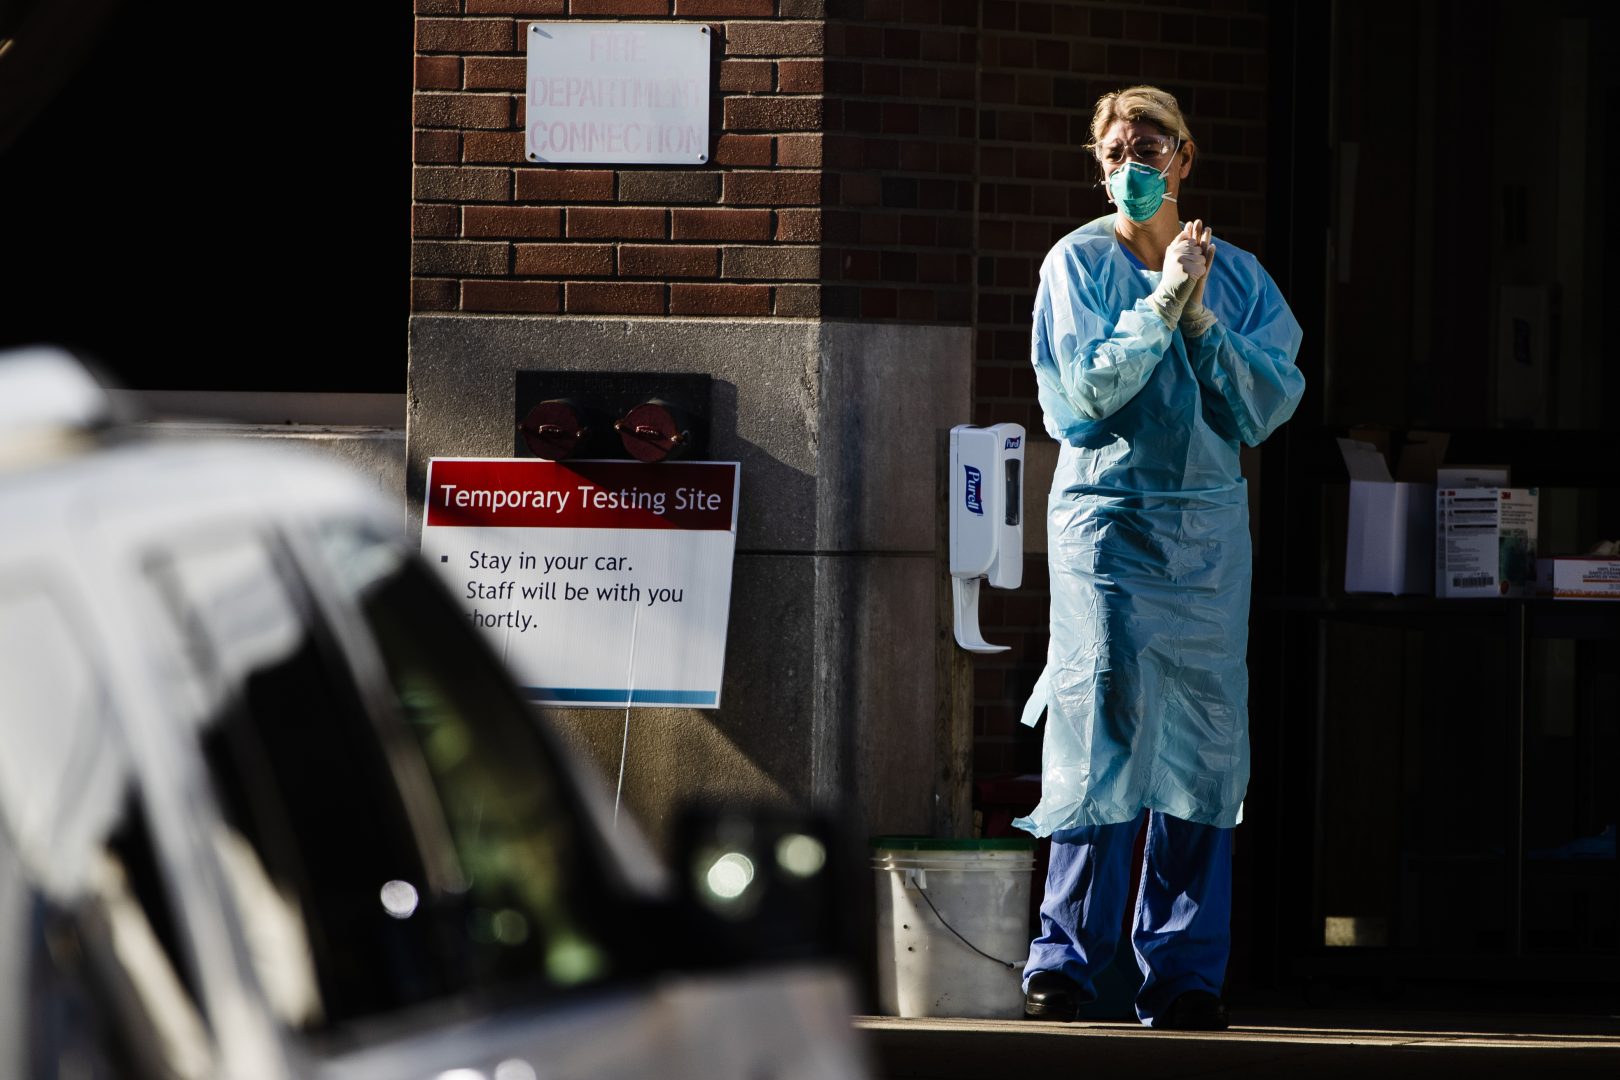 A healthcare worker stands by at a COVID-19 temporary testing site at Abington Hospital in Abington, Pa., Wednesday, March 18, 2020. For most people, the new coronavirus causes only mild or moderate symptoms. For some it can cause more severe illness. (AP Photo/Matt Rourke)